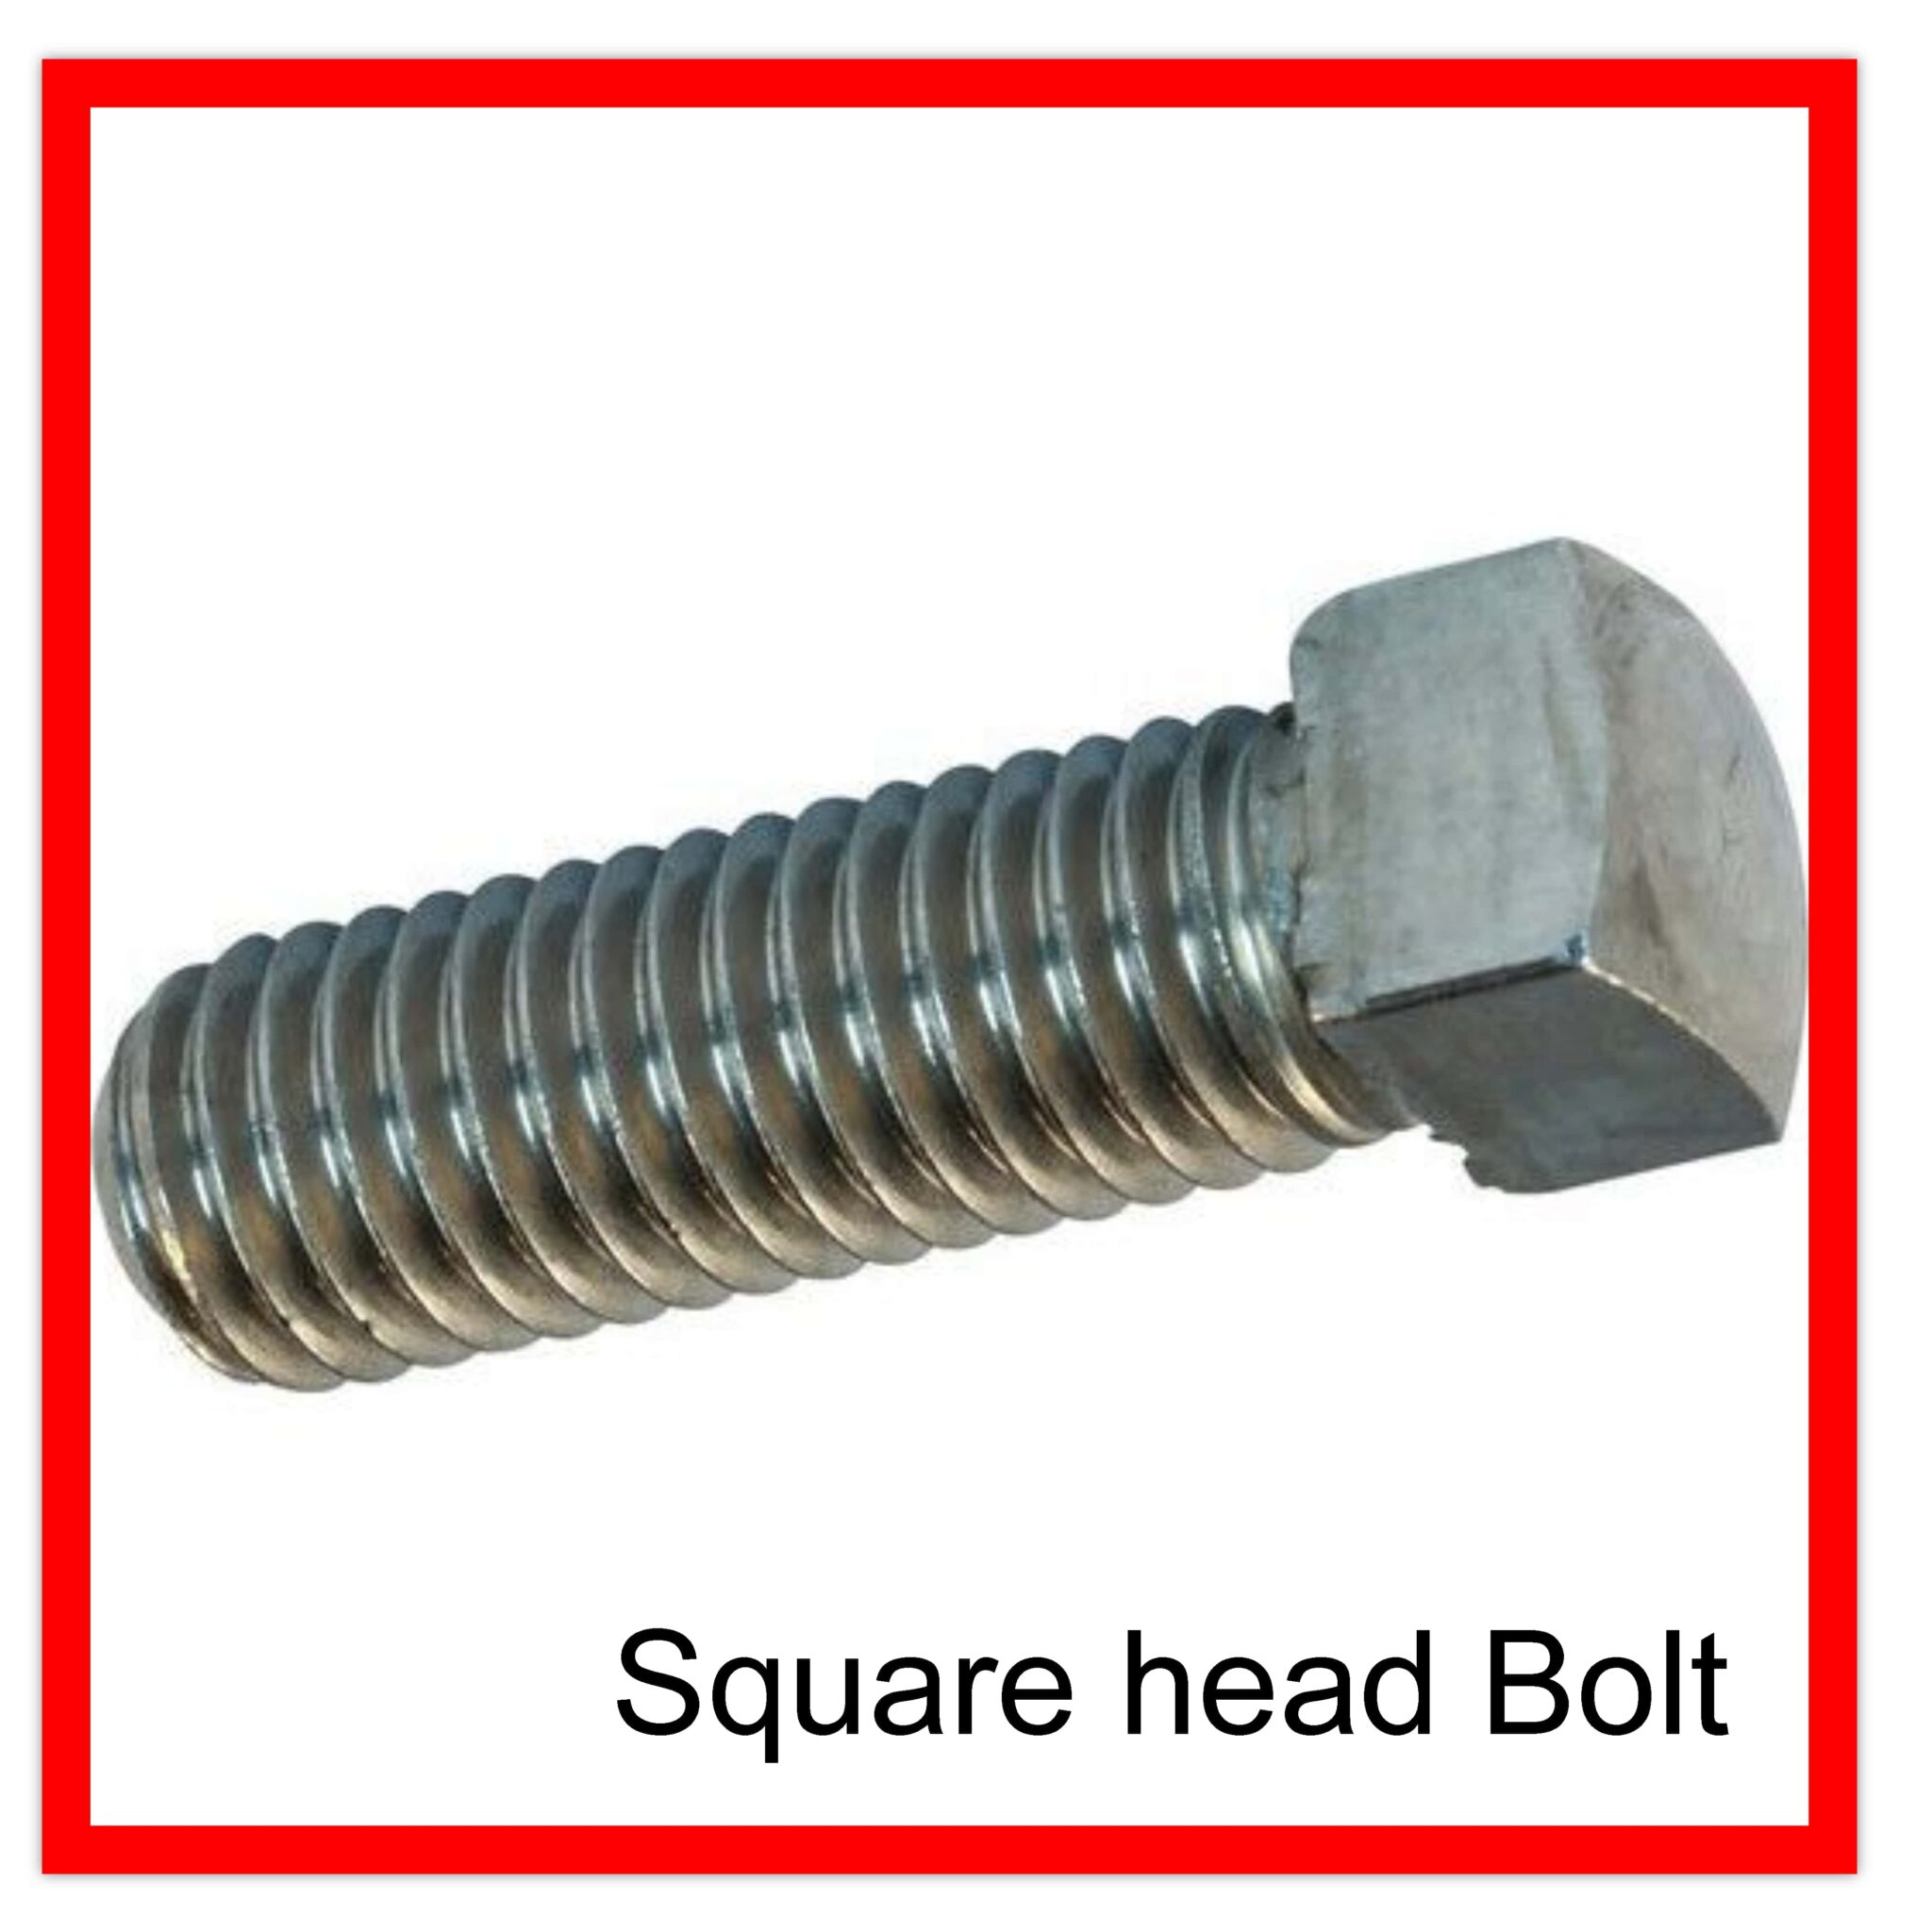 8 Types Of Bolts And Their Uses With Pictures And Names Engineering Learn 